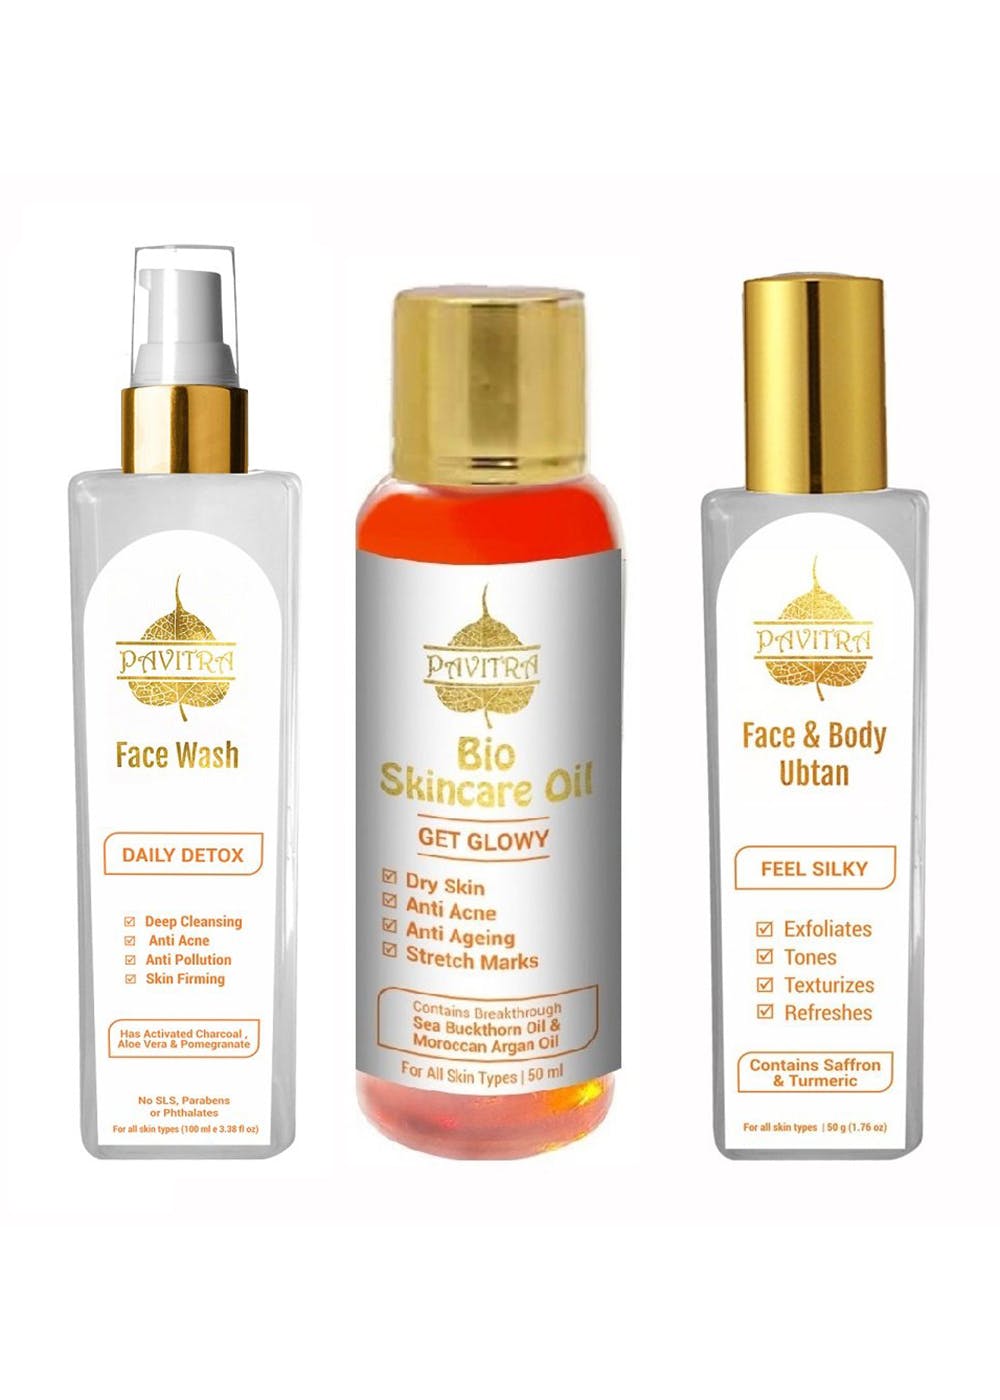 Total Skincare Kit with Antimarks Oil, Instant Glow Ubtan and Detox Facewash - 50ml+50g+100ml